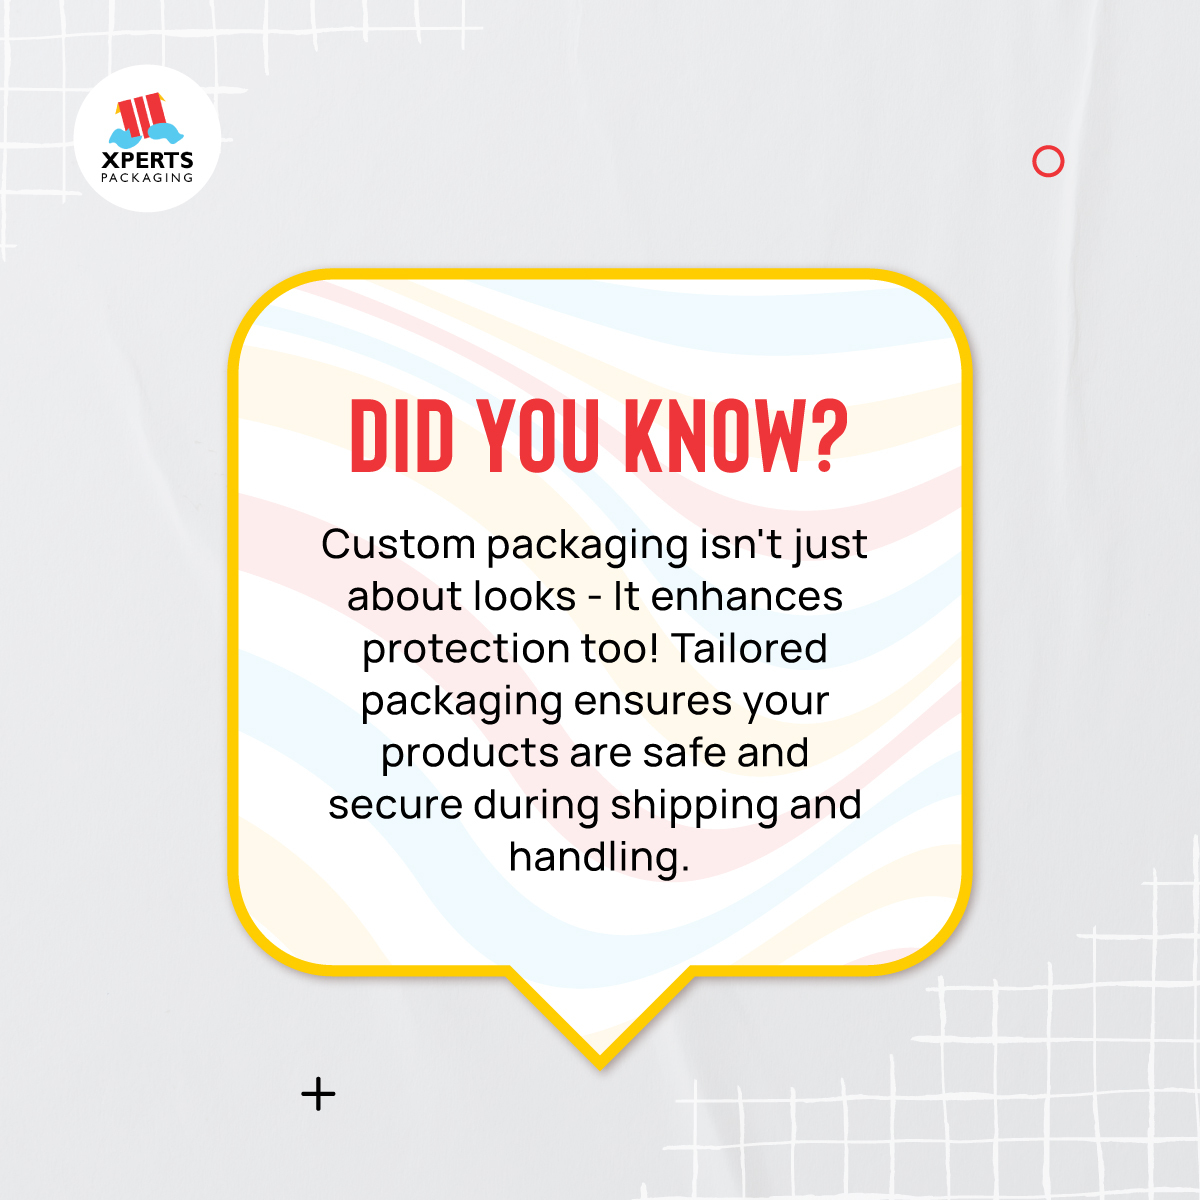 ✨ Did You Know? ✨

📦 Custom packaging isn't just about looks – it enhances protection too! 🔒

#CustomPackaging #PackagingSolutions #ProductProtection
#ShippingSafety
#SecurePackaging
#BrandCare
#HandleWithCare #ShippingSolutions #ProductSecurity